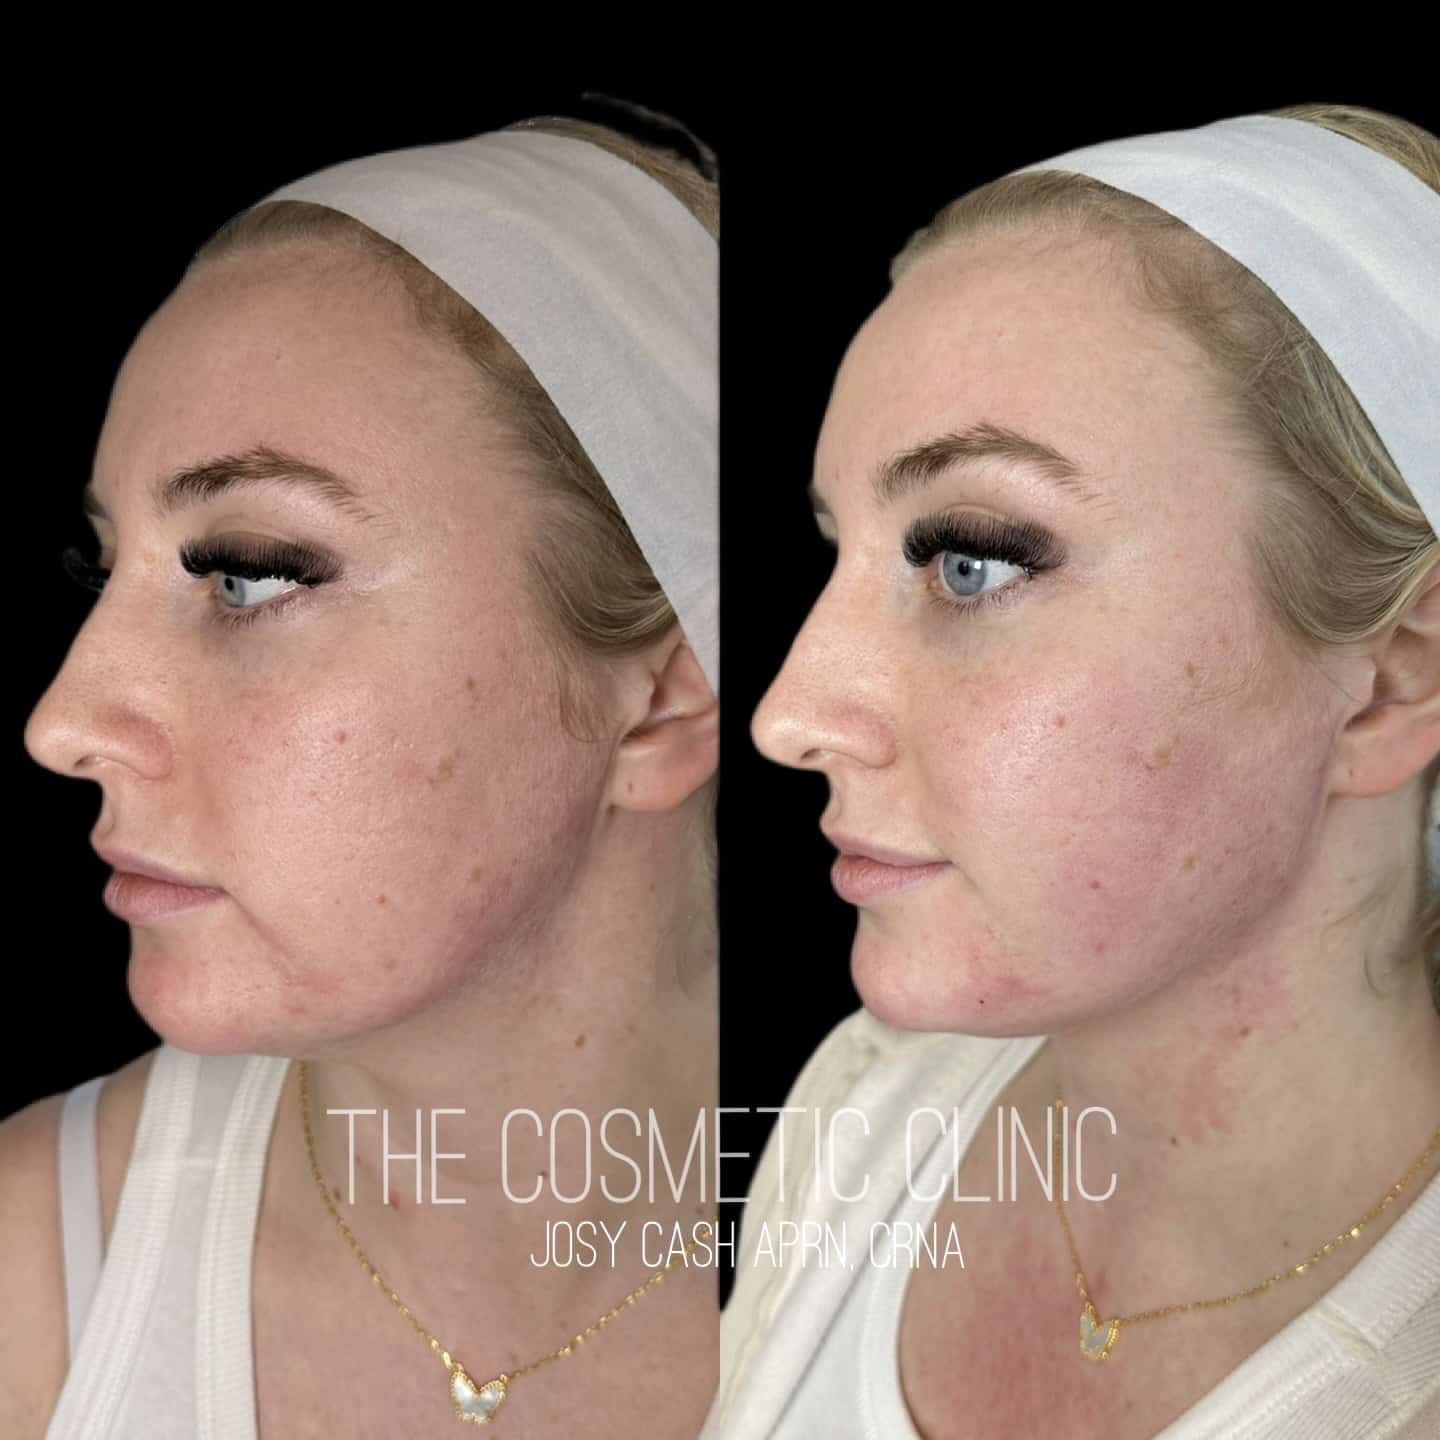 Female Dermal Filler Before and After Photos with The Cosmetic Clinic JOSY CASH APRN,CRNA The Cosmetic Clinic in Greenwich, CT